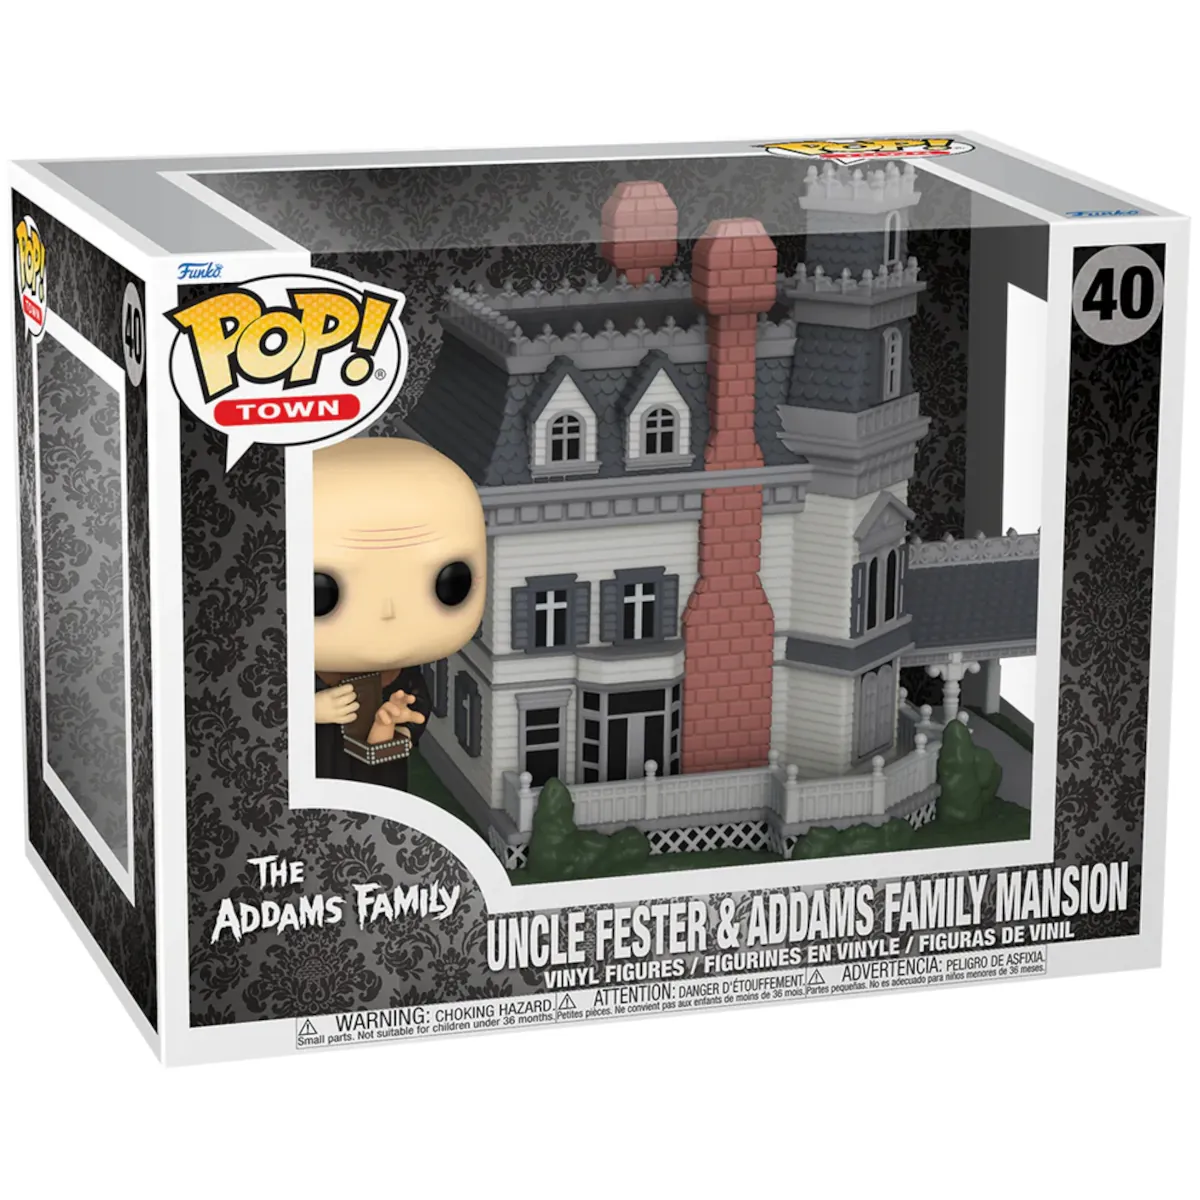 81208 Funko Pop! Town - The Addams Family - Uncle Fester & Addams Family Mansion Collectable Vinyl Figure Box